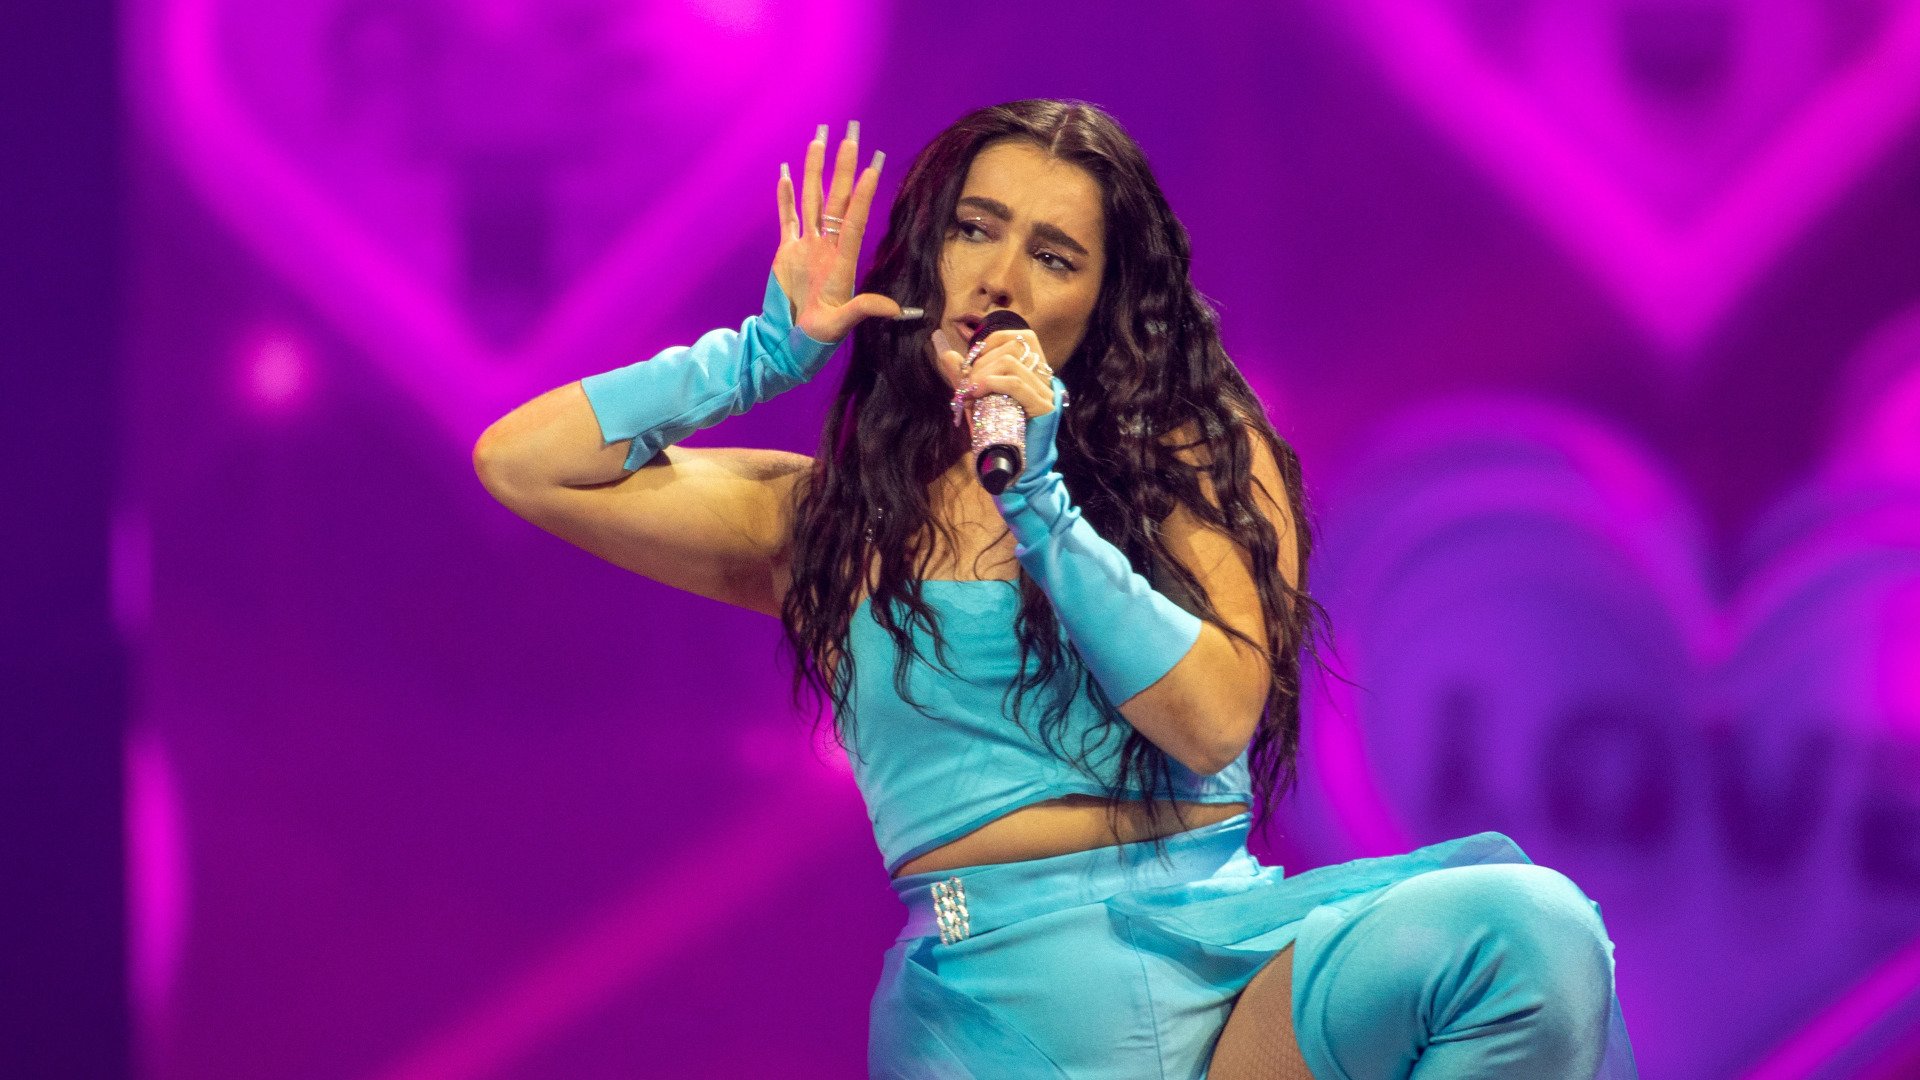 Eurovision 2022 live stream: dates, songs, odds, winners and how to watch from anywhere